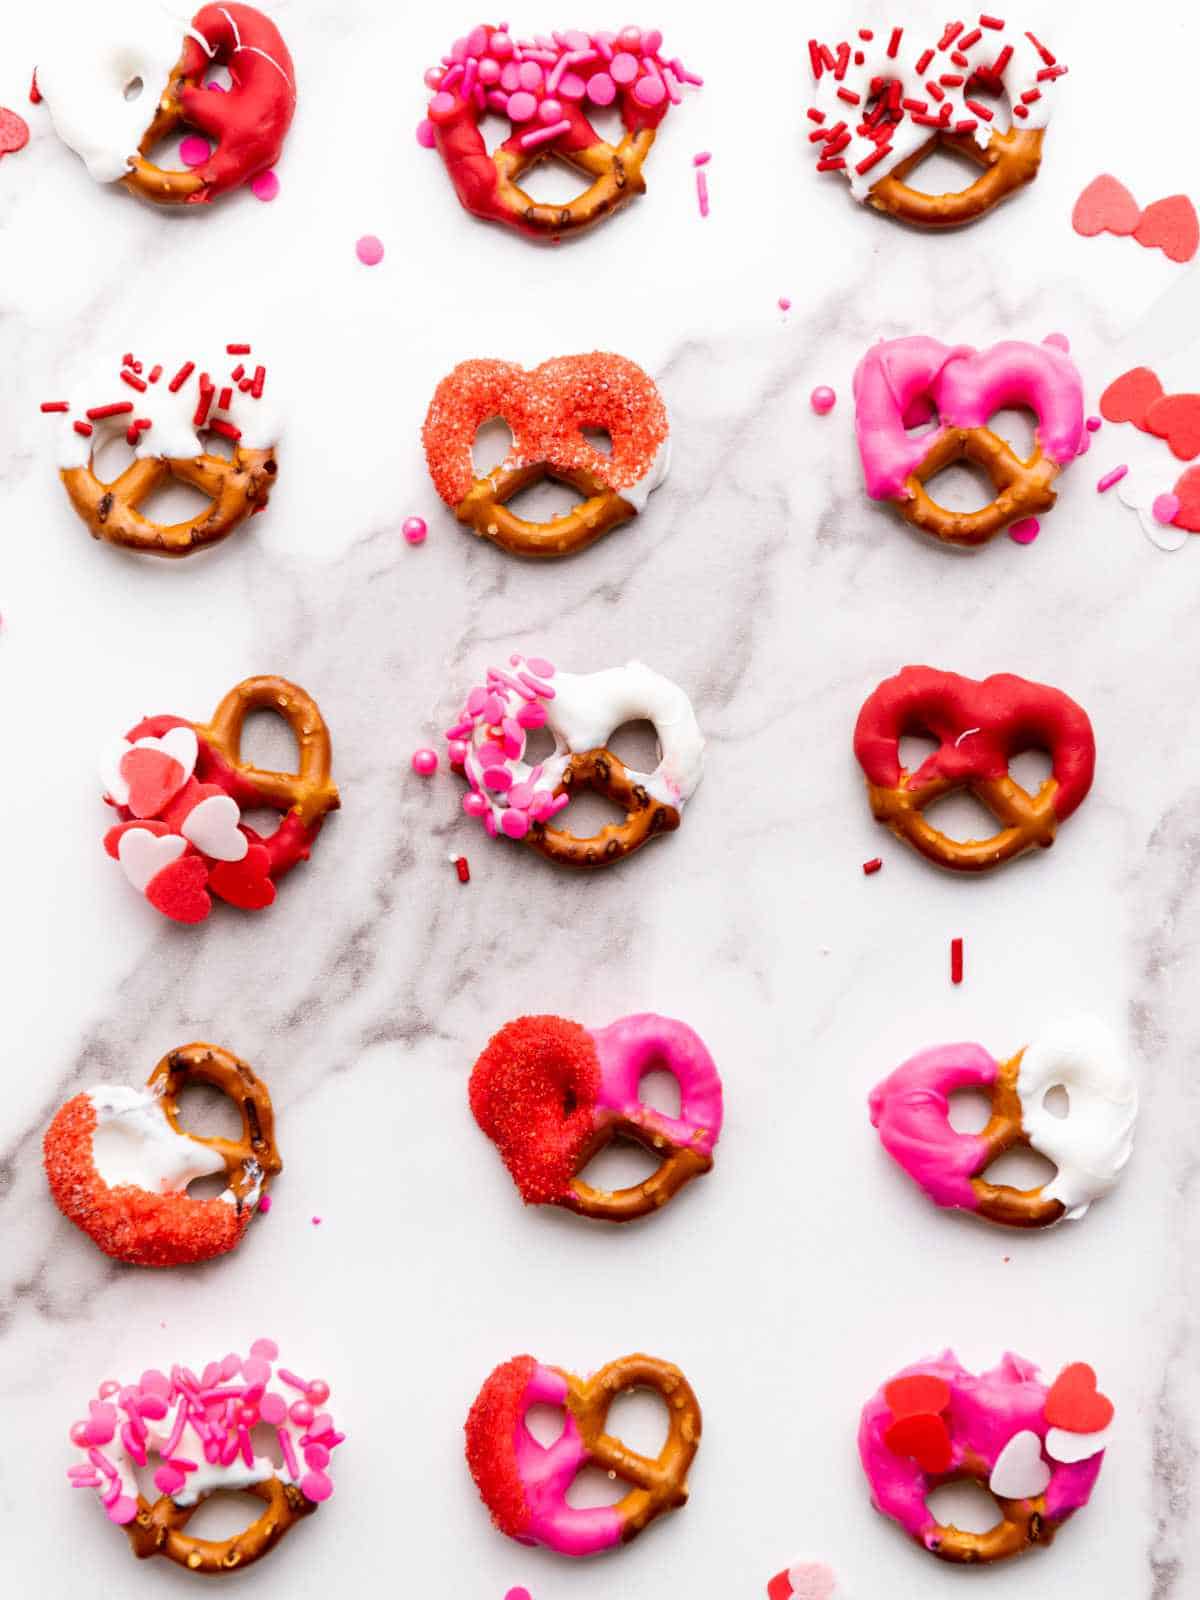 display of chocolate covered pretzels valentines dipped in red, pink, and white melted candy wafers with hearts and sugar decor. 